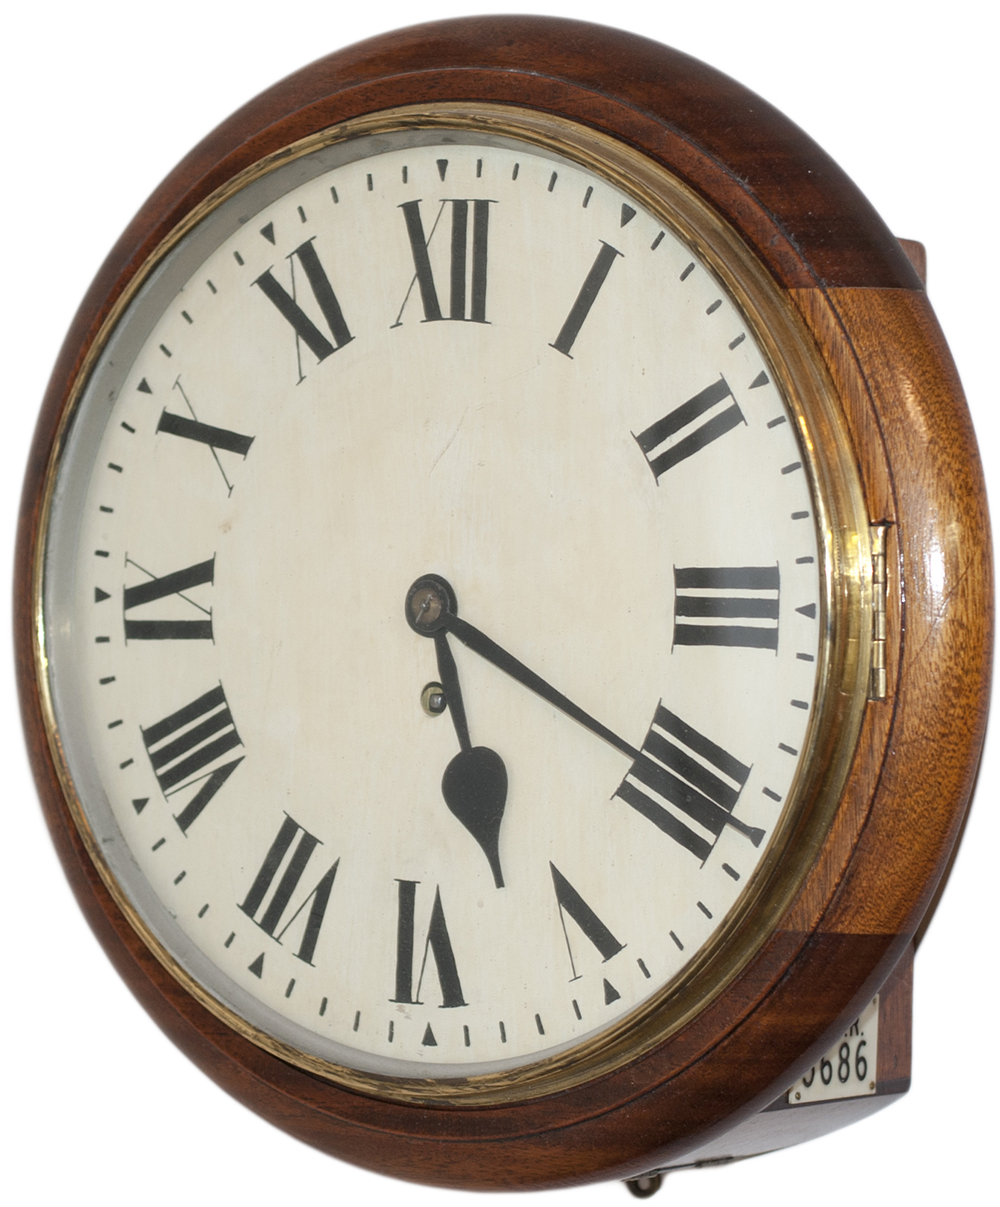 Great Western Railway 12in oak cased railway clock with a wire driven English fusee movement. The